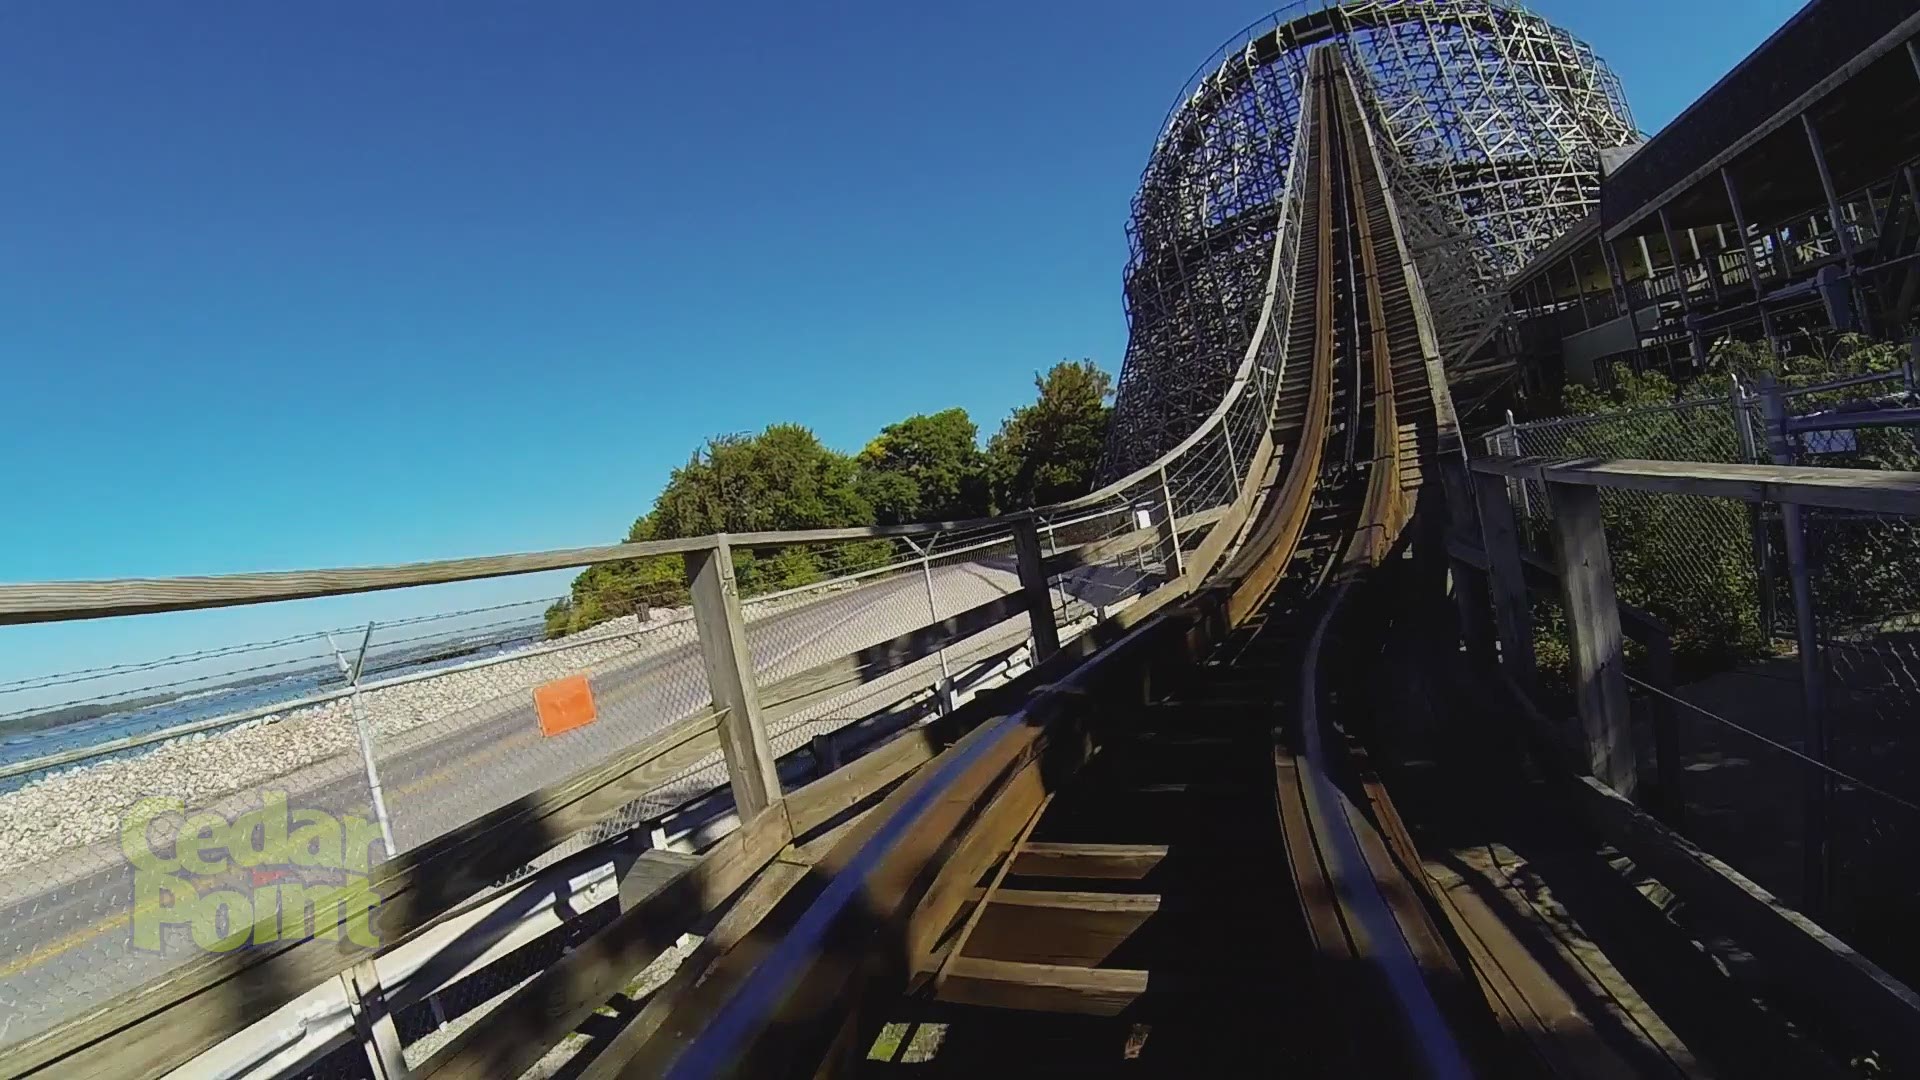 Cedar Point's Mean Streak opened in 1991. At the time, it was the tallest wooden roller coaster in the world.